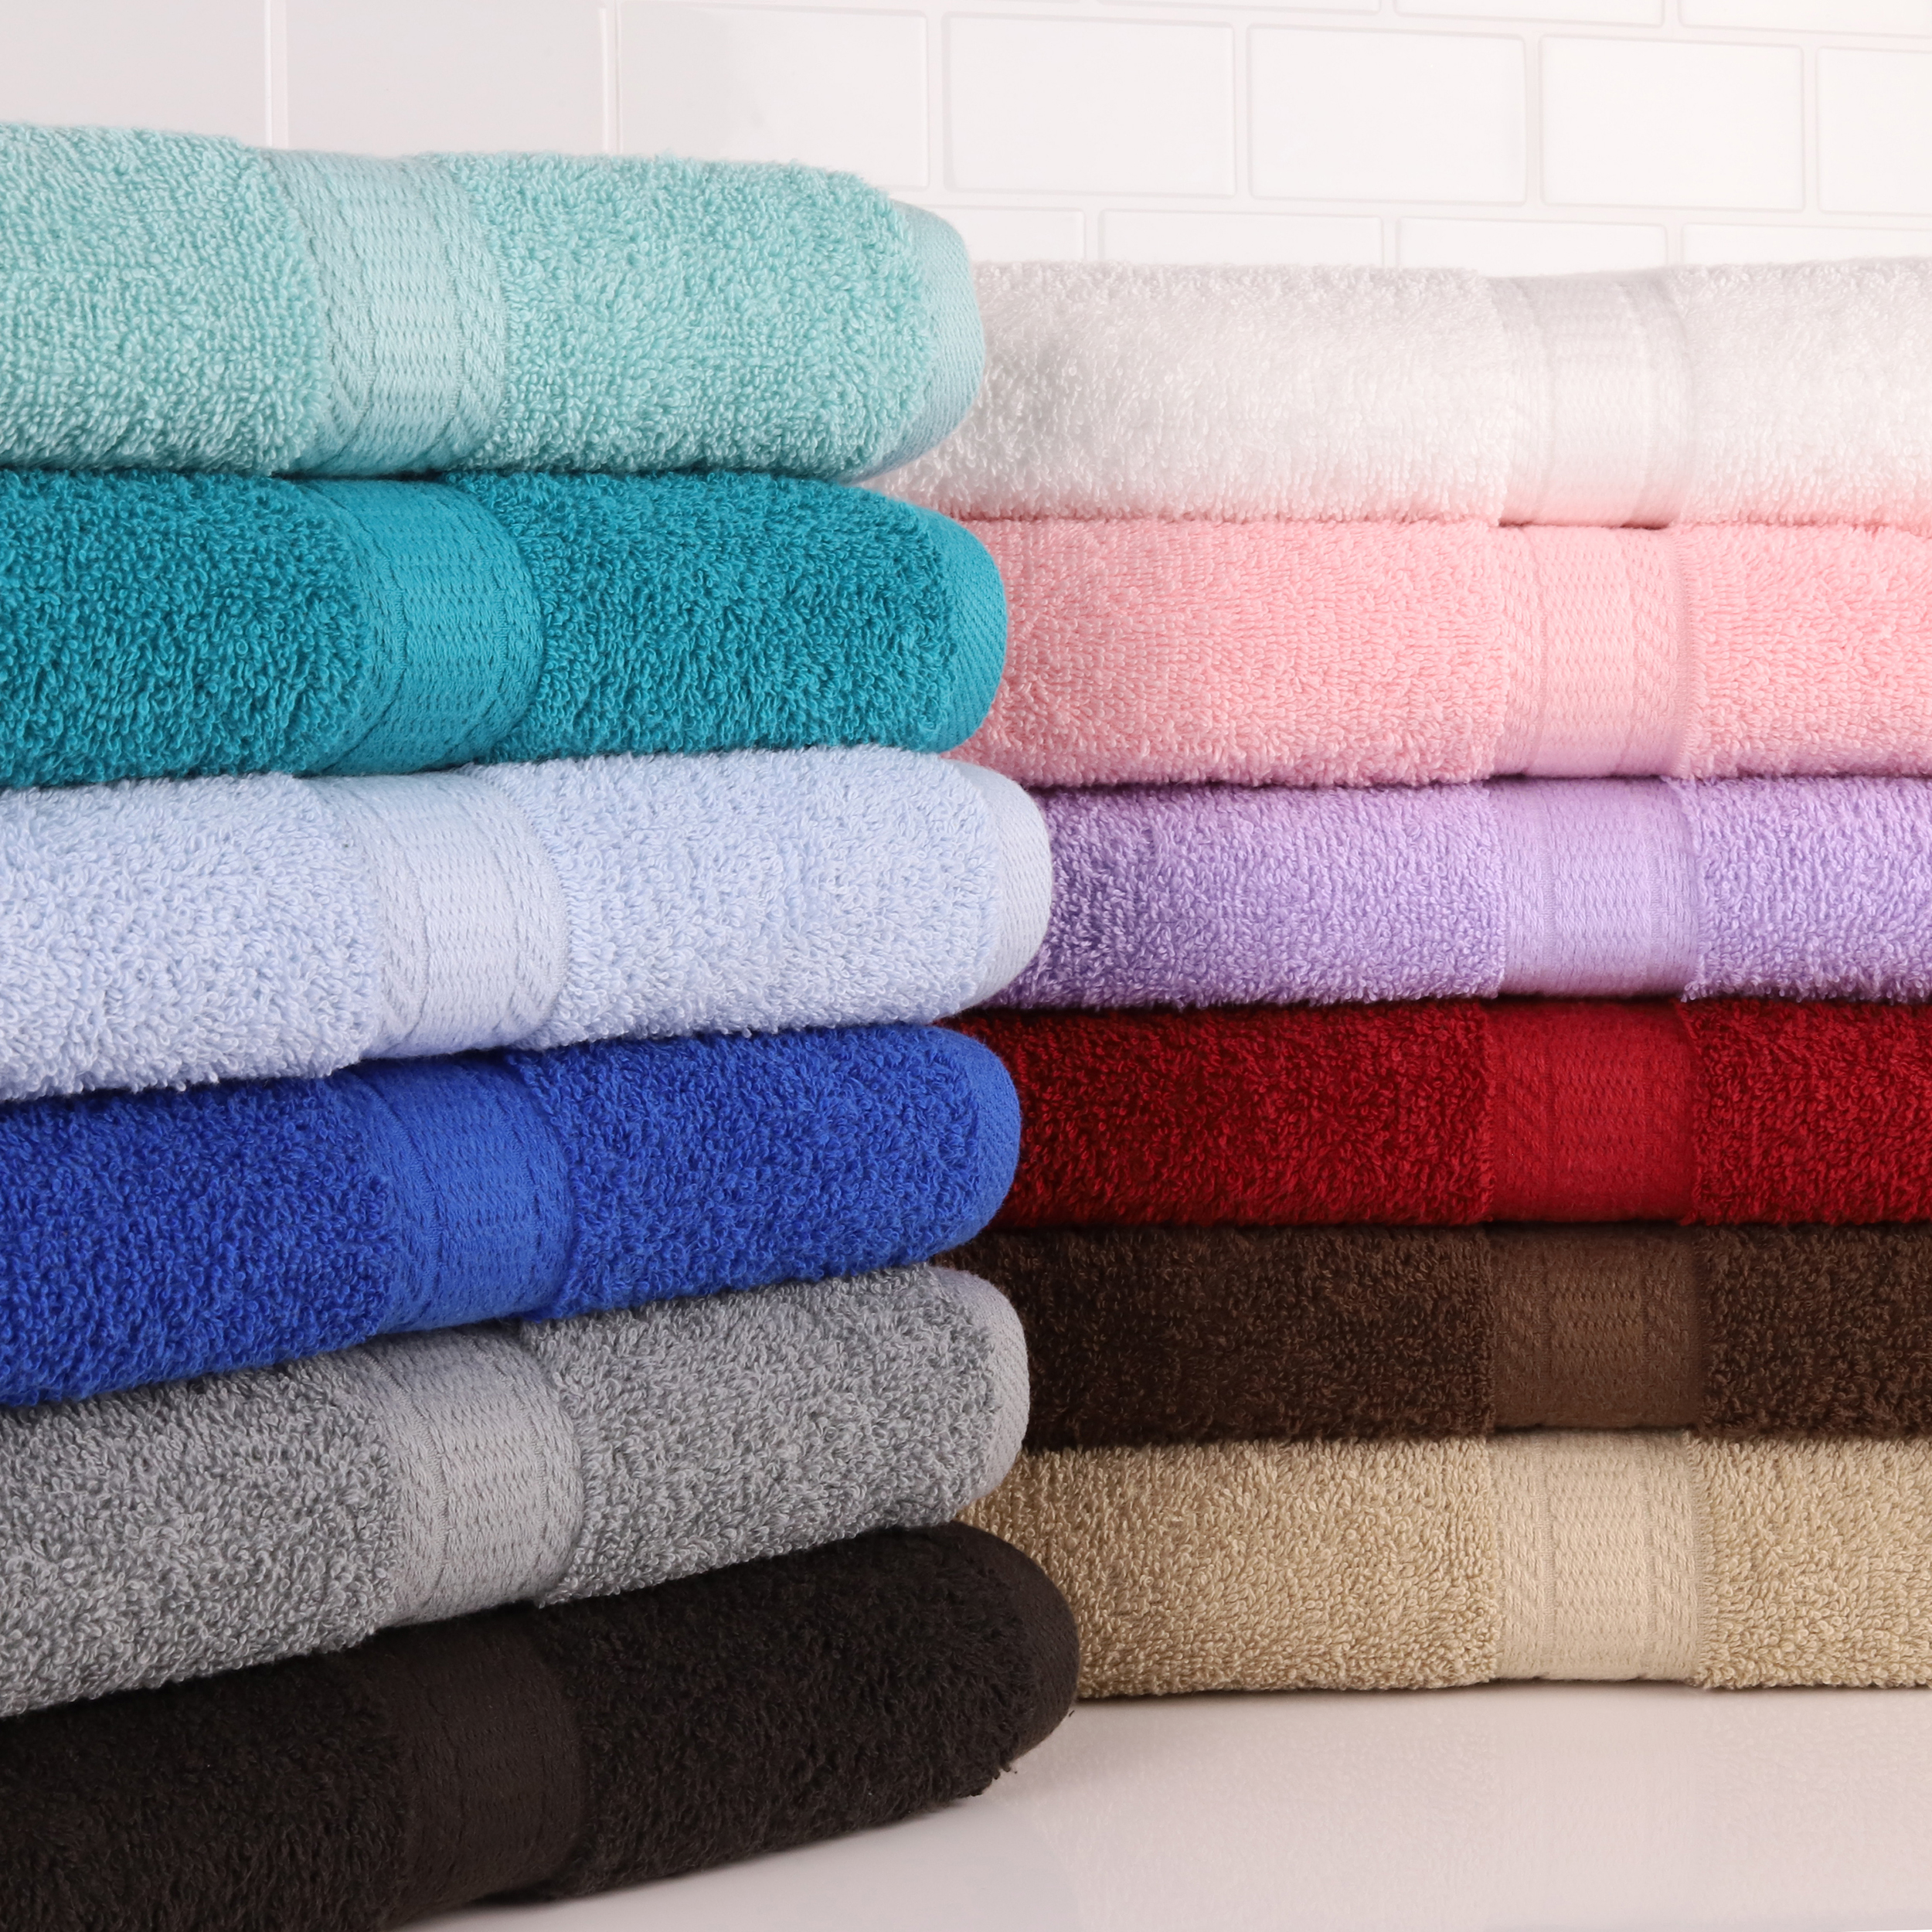 Mainstays Basic Solid 18-Piece Bath Towel Set Collection, Royal Spice - image 5 of 10